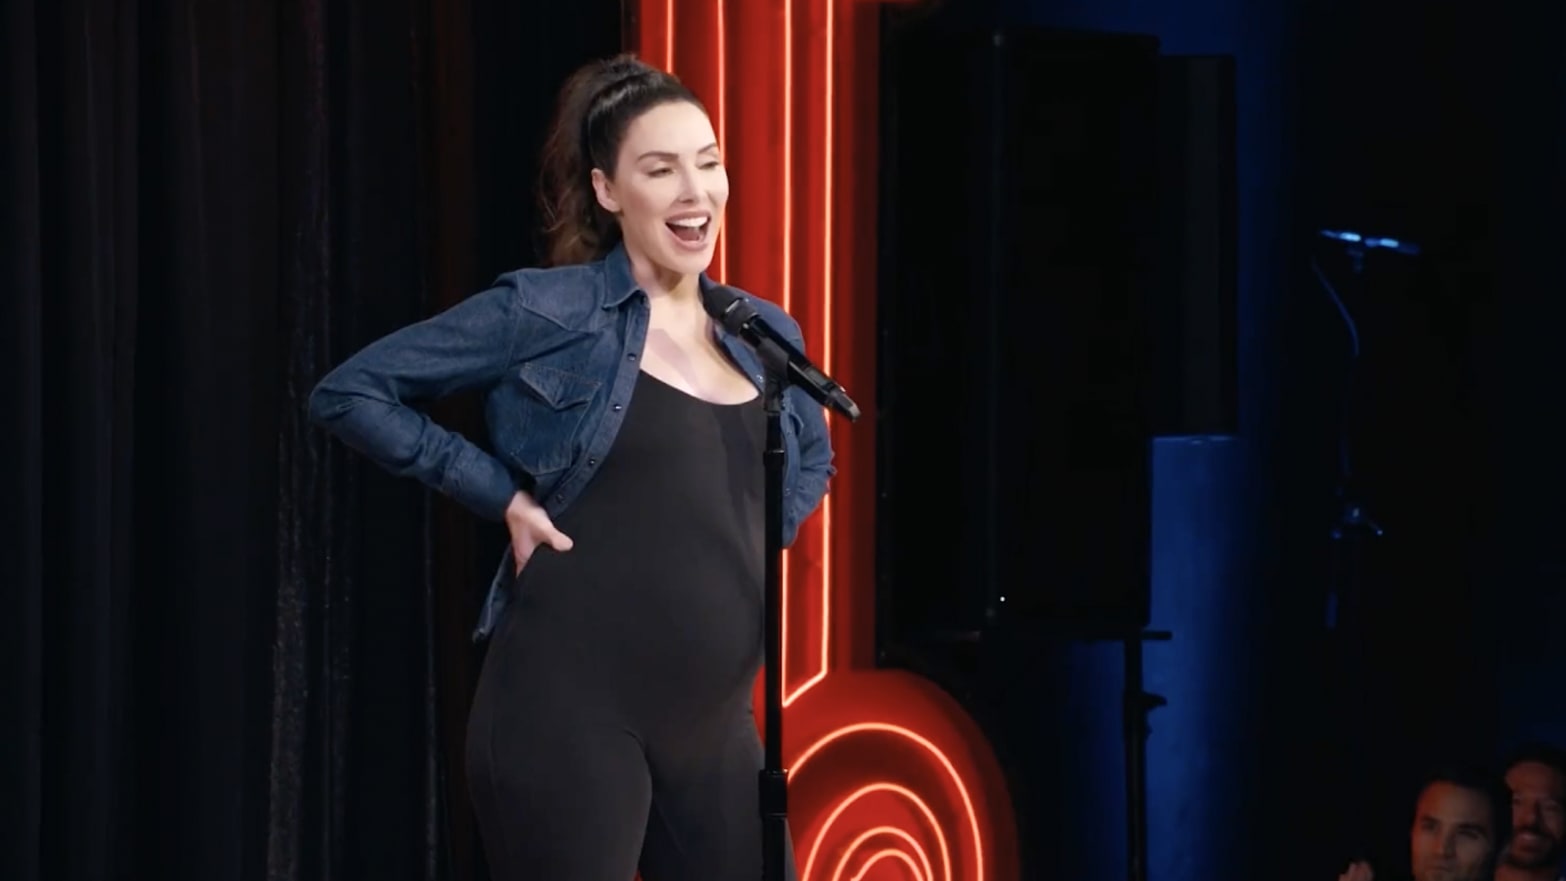 Whitney Cummings performs in stand-up special "Mouthy"